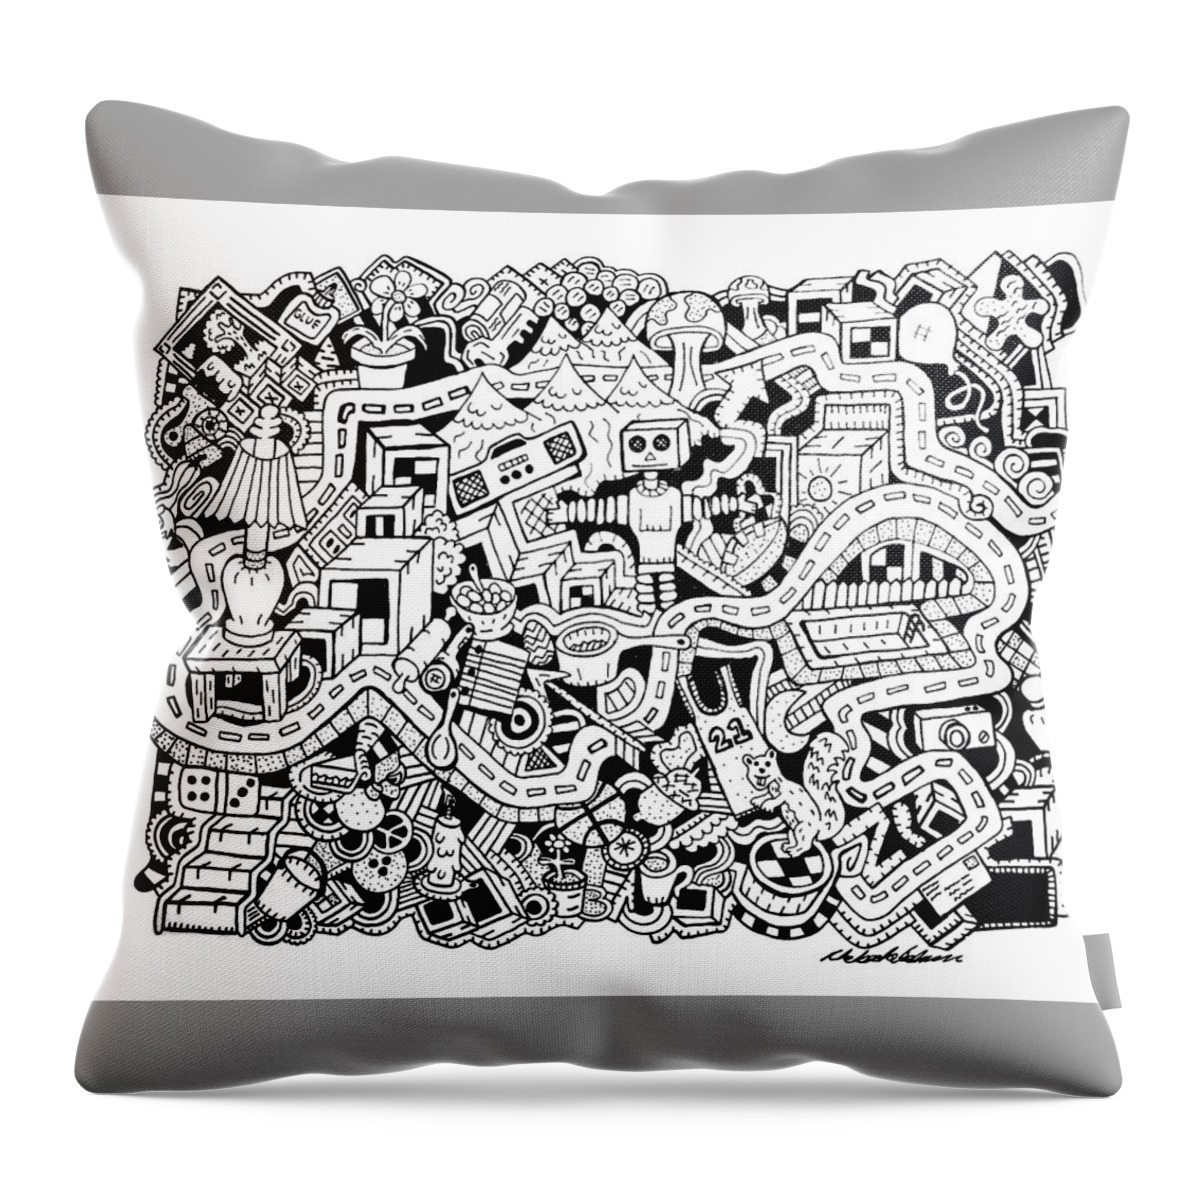 Random Objects Throw Pillow featuring the drawing Z Squirrel by Chelsea Geldean